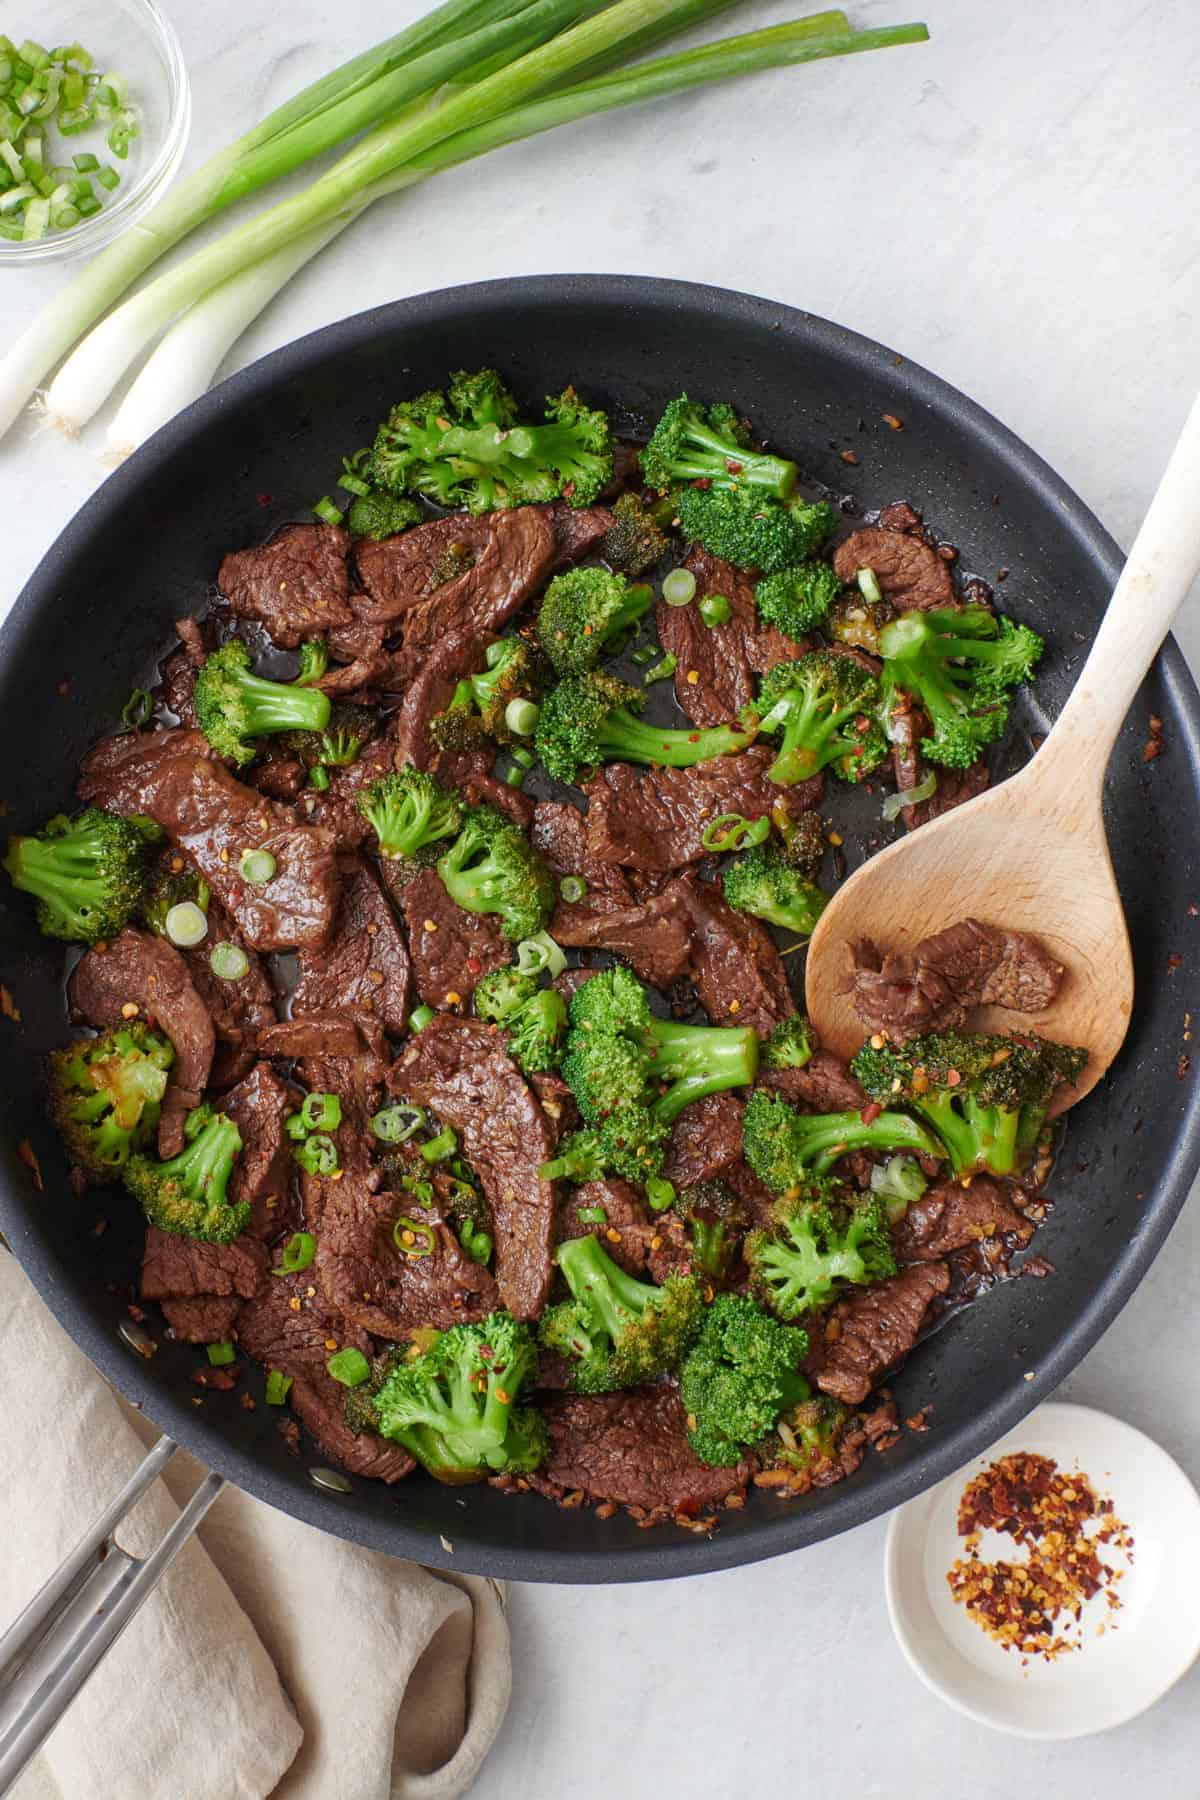 Large bowl of beef and broccoli rice stir fry